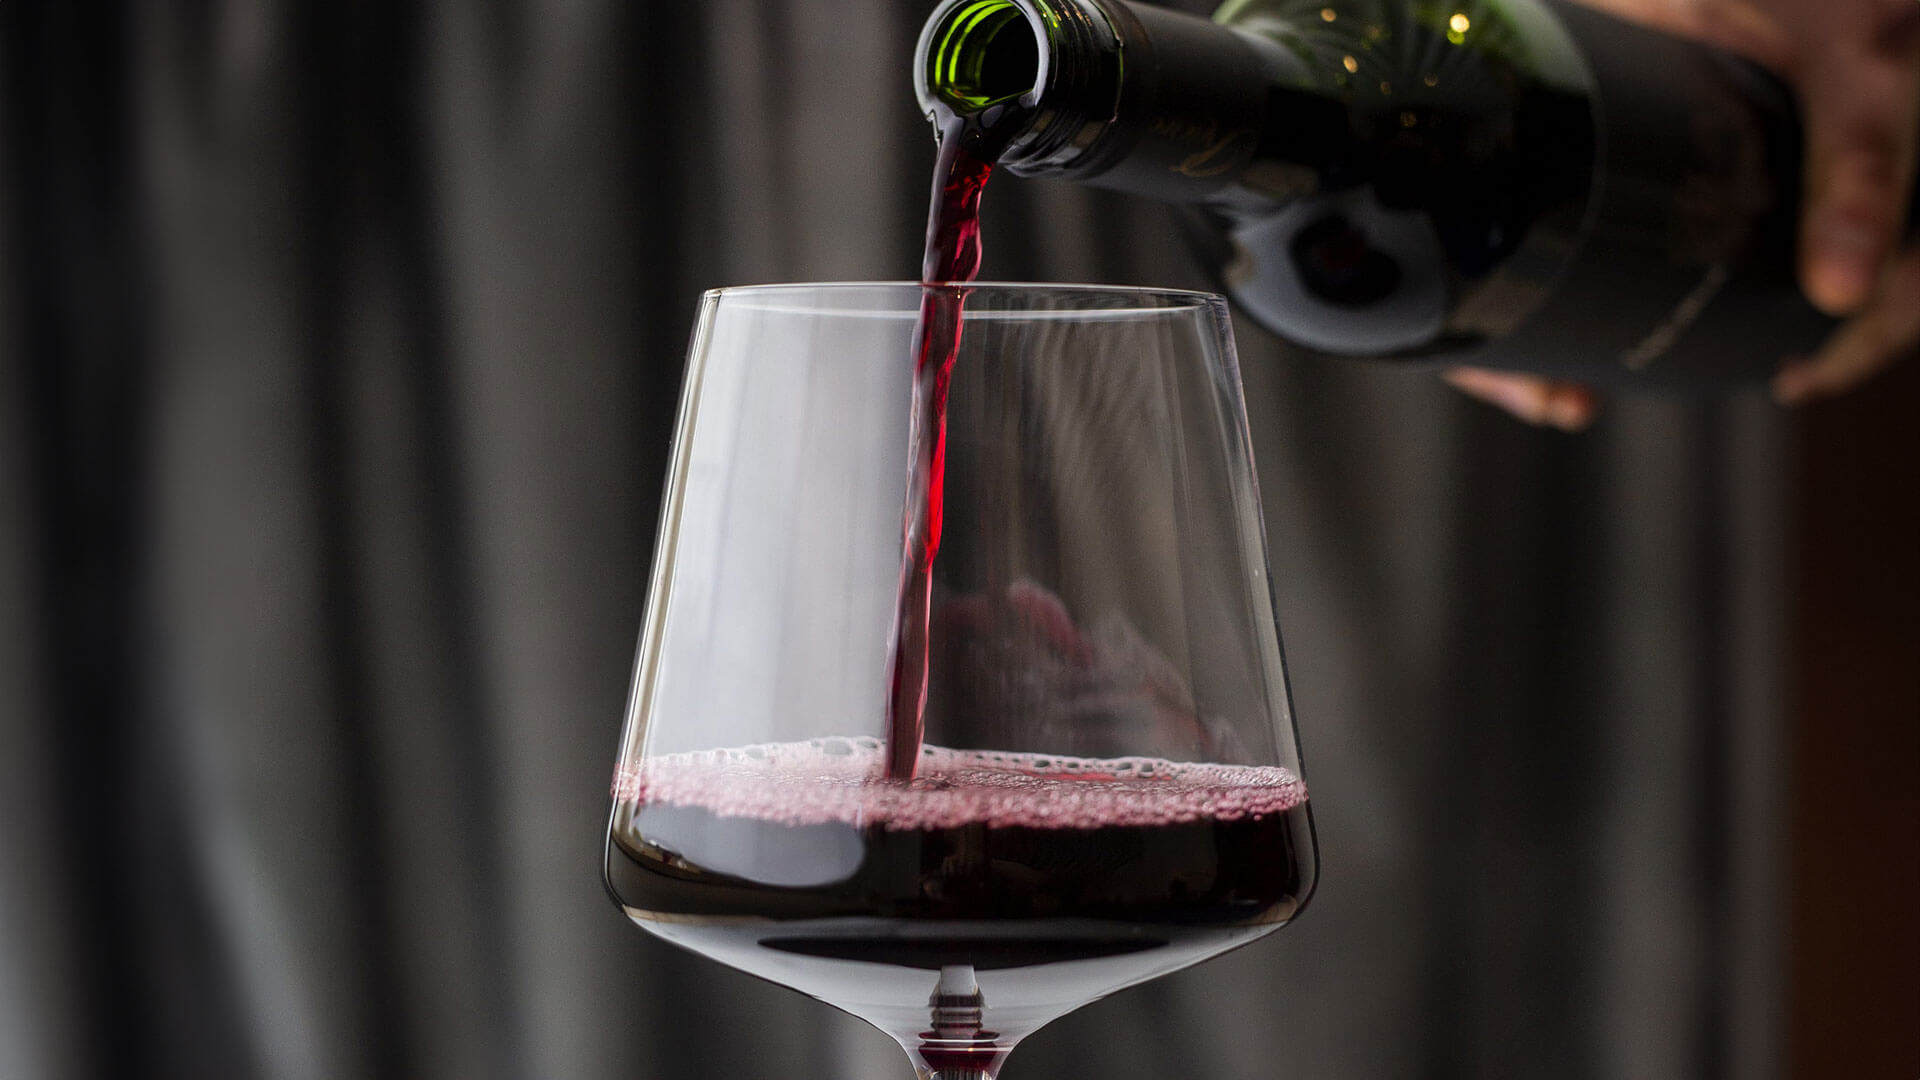 Pouring red wine into a red wine glass.